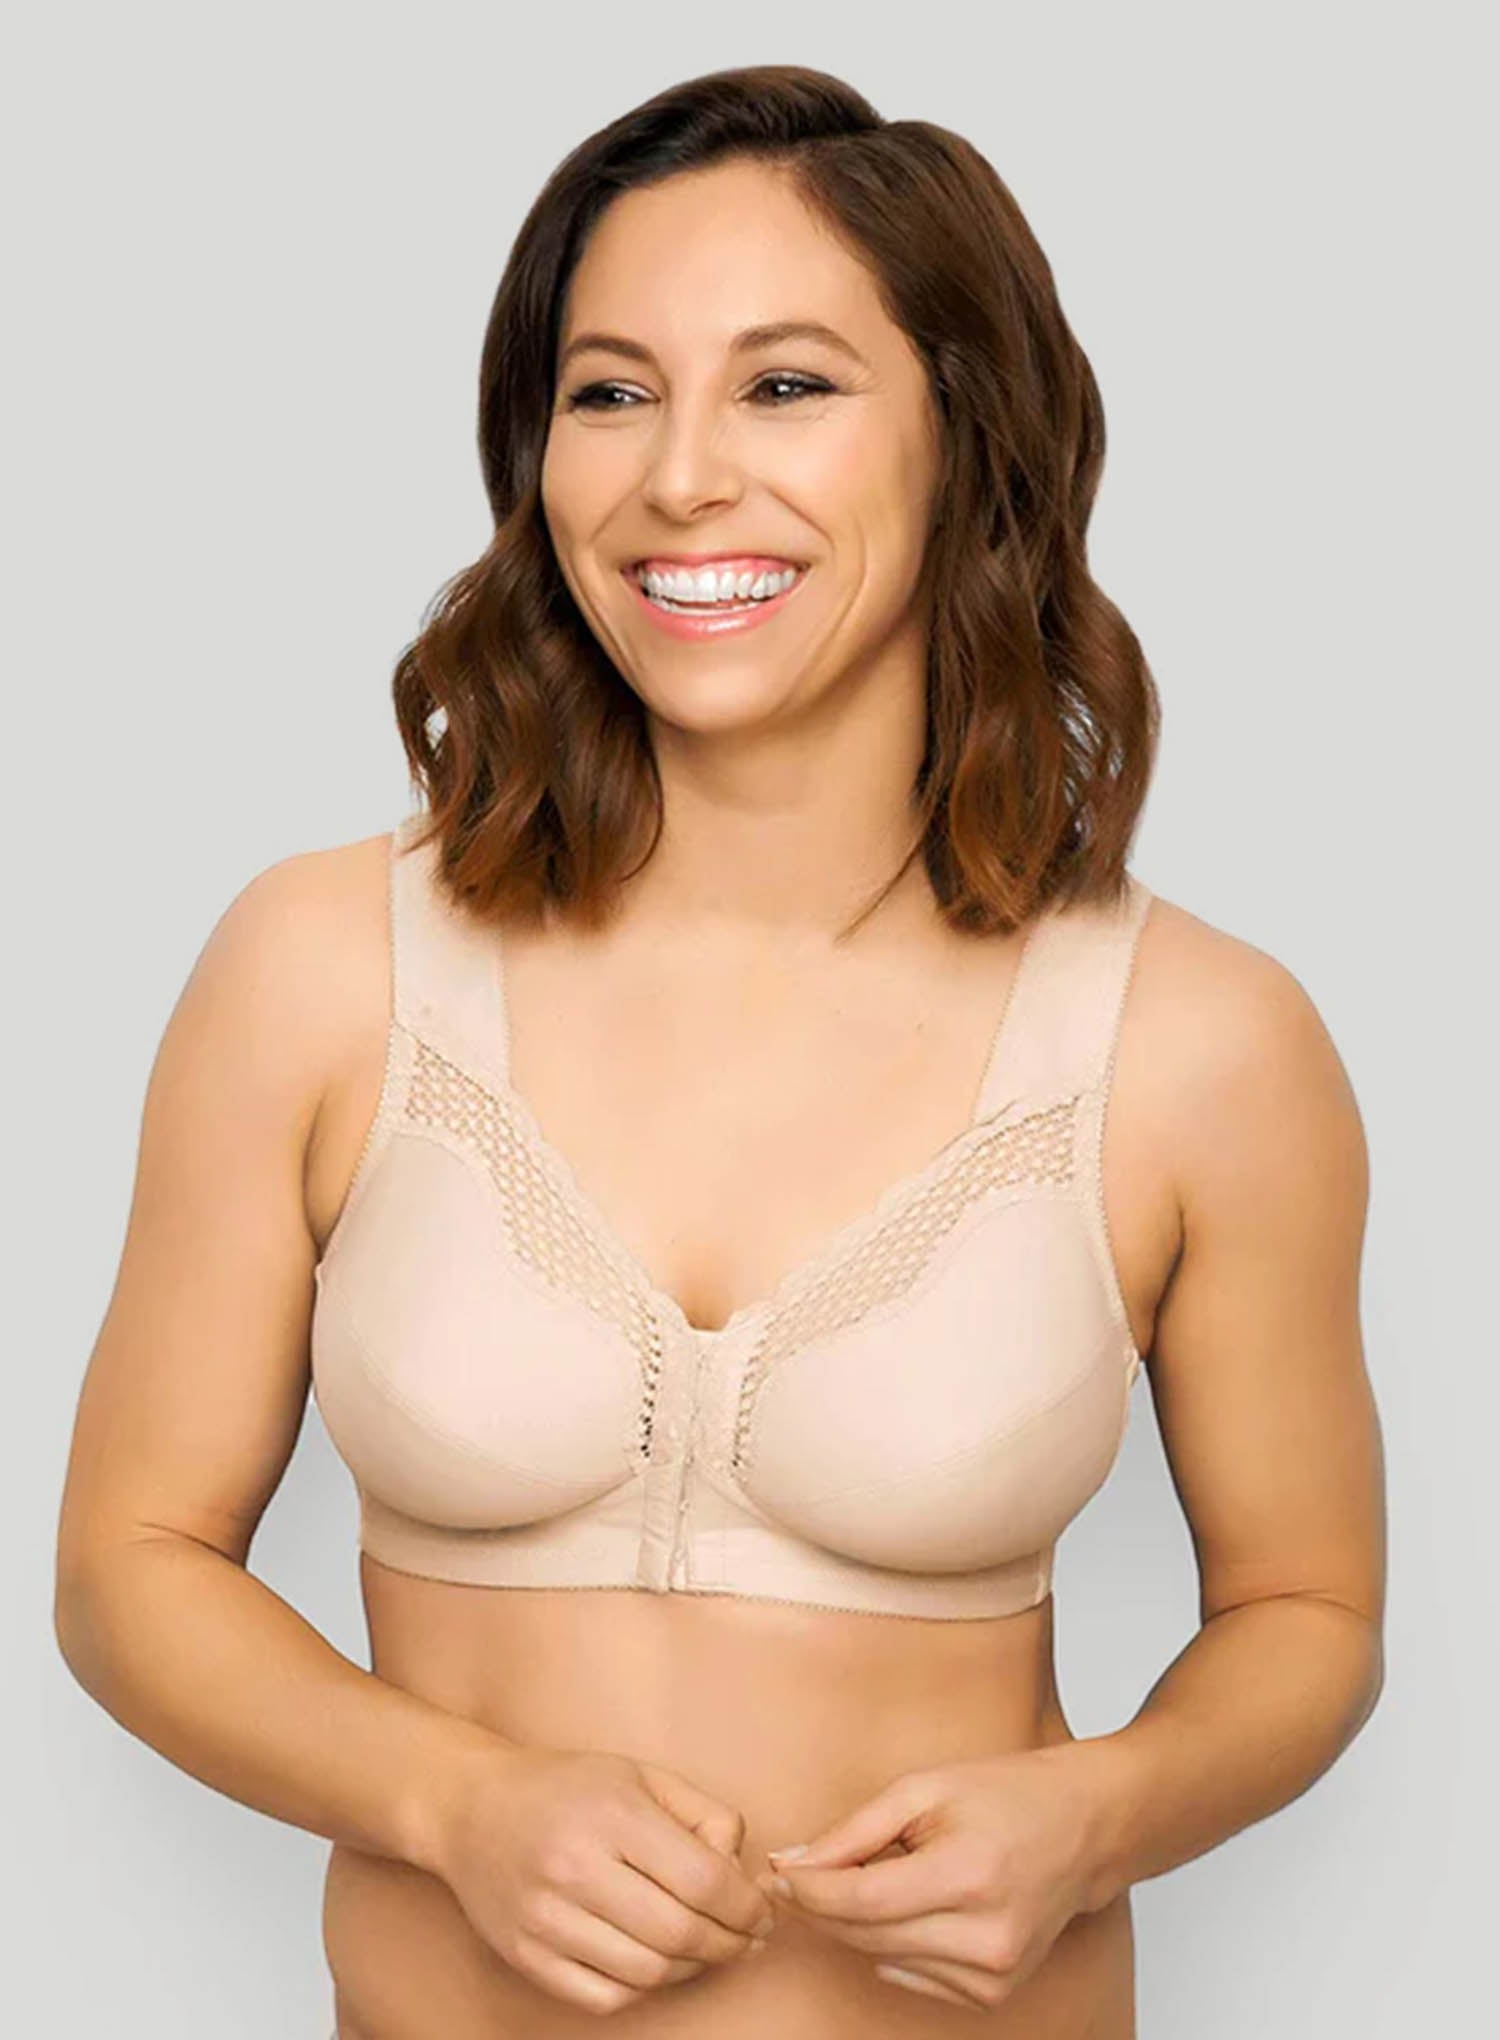 Gorgeous Nude Lady Taking Off Bra Stock Photo - Image of posture